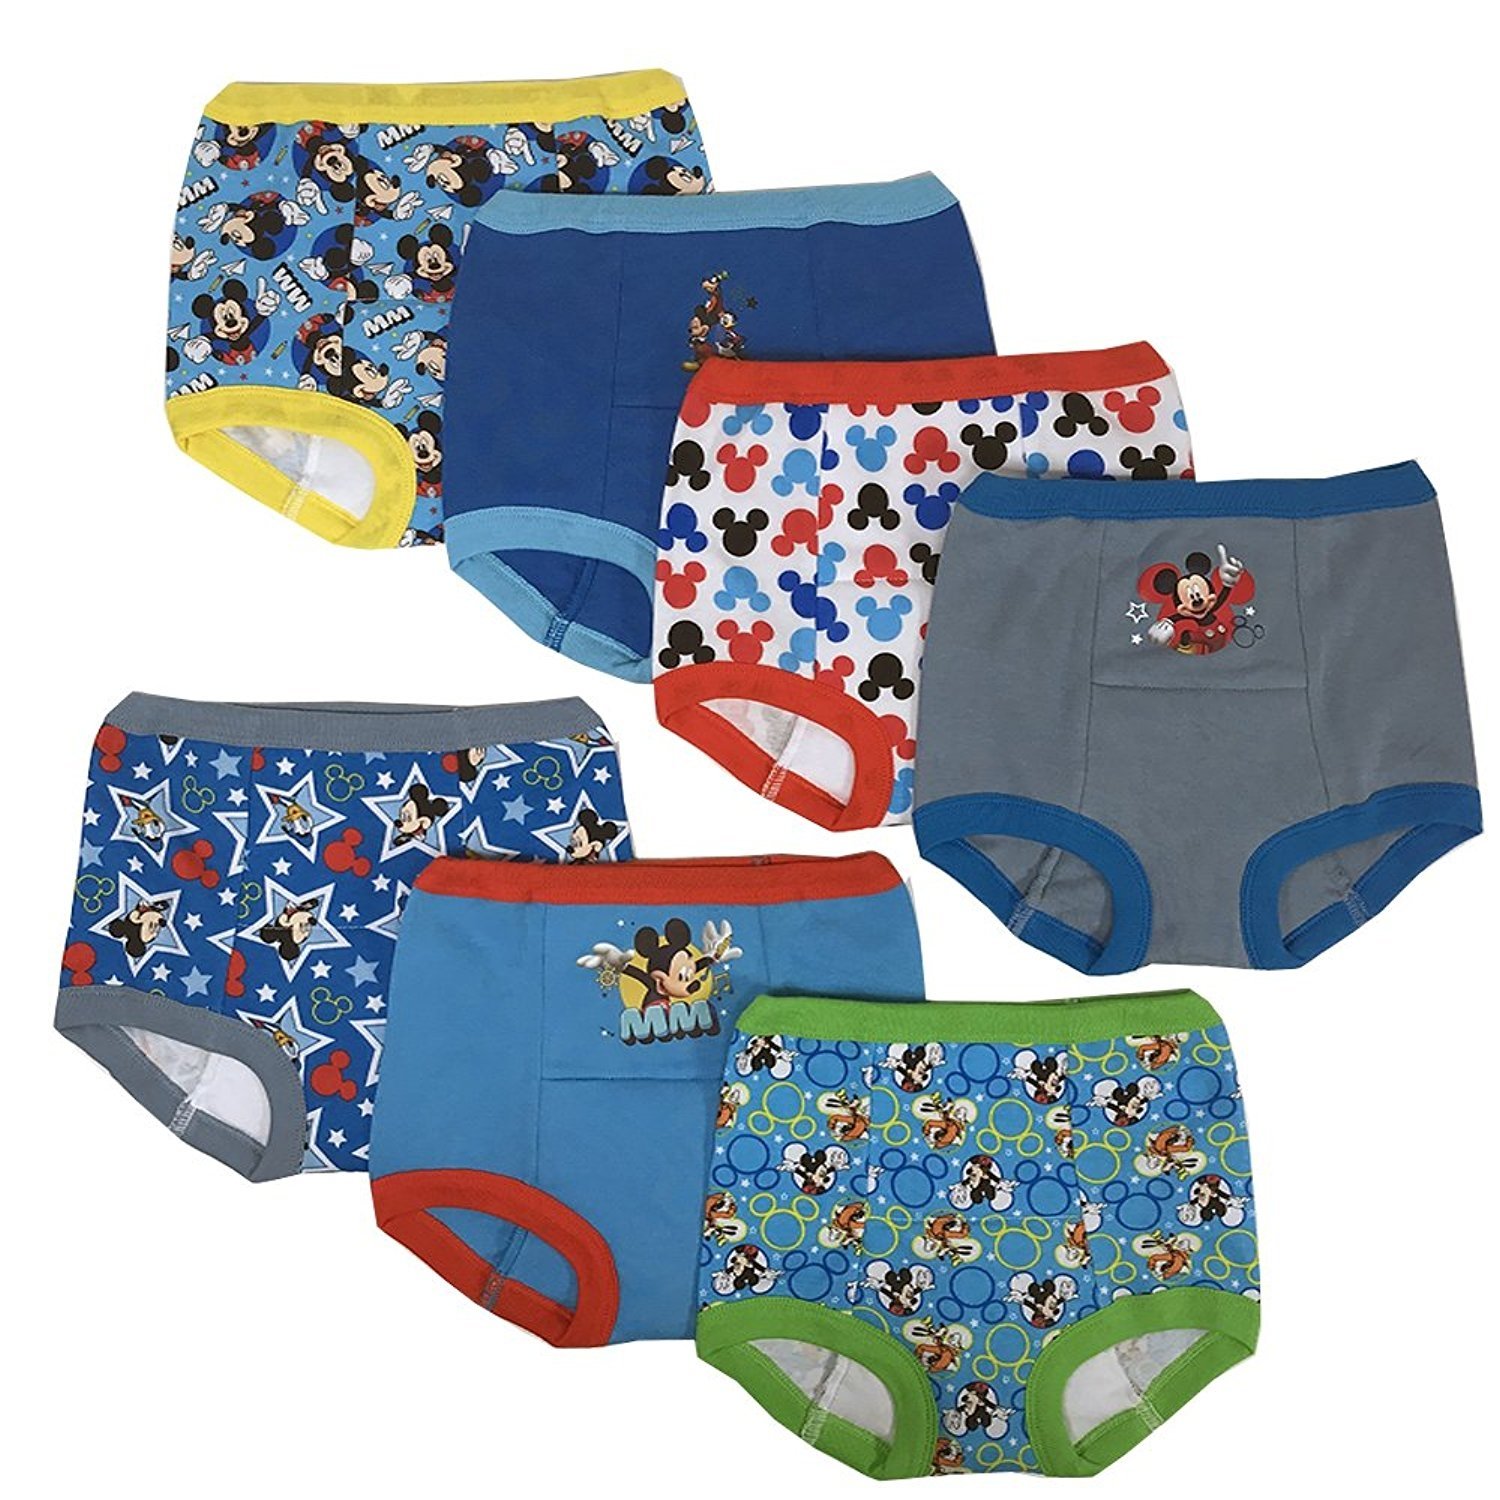 Disney Mickey Mouse Boys Potty Training Pants 7-pack Underwear Toddler